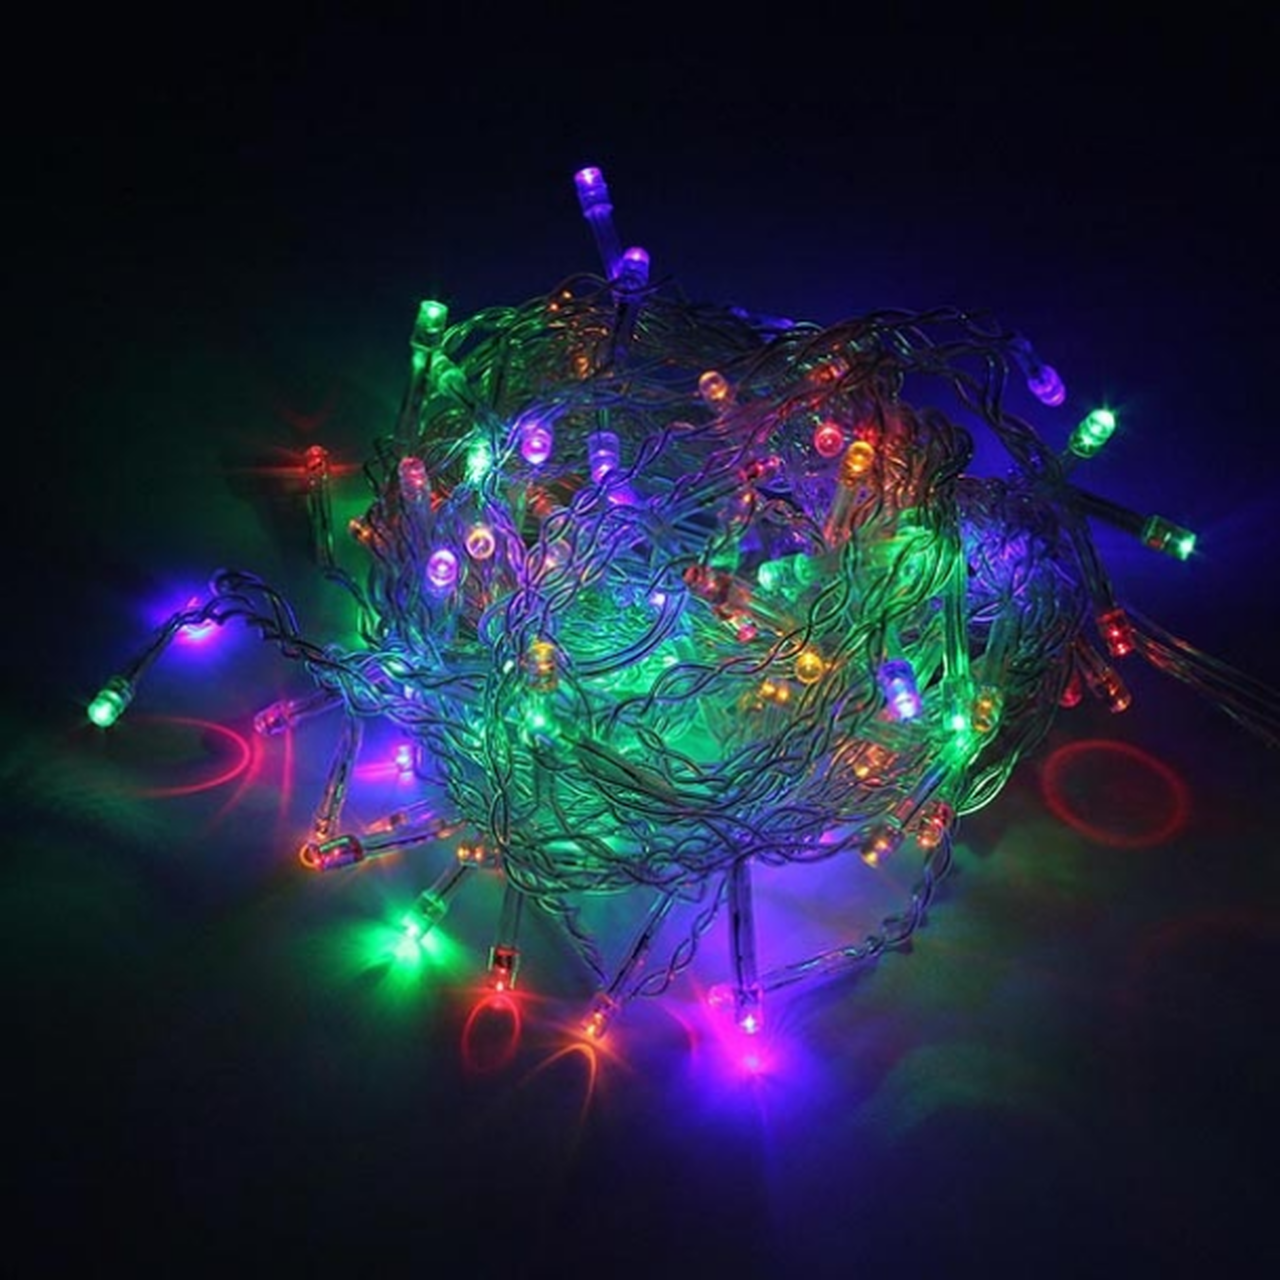 3x3 Meter Multi Color LED Curtain Lights, Multi-Color with Waterfall/Snowing Effect, Waterproof 